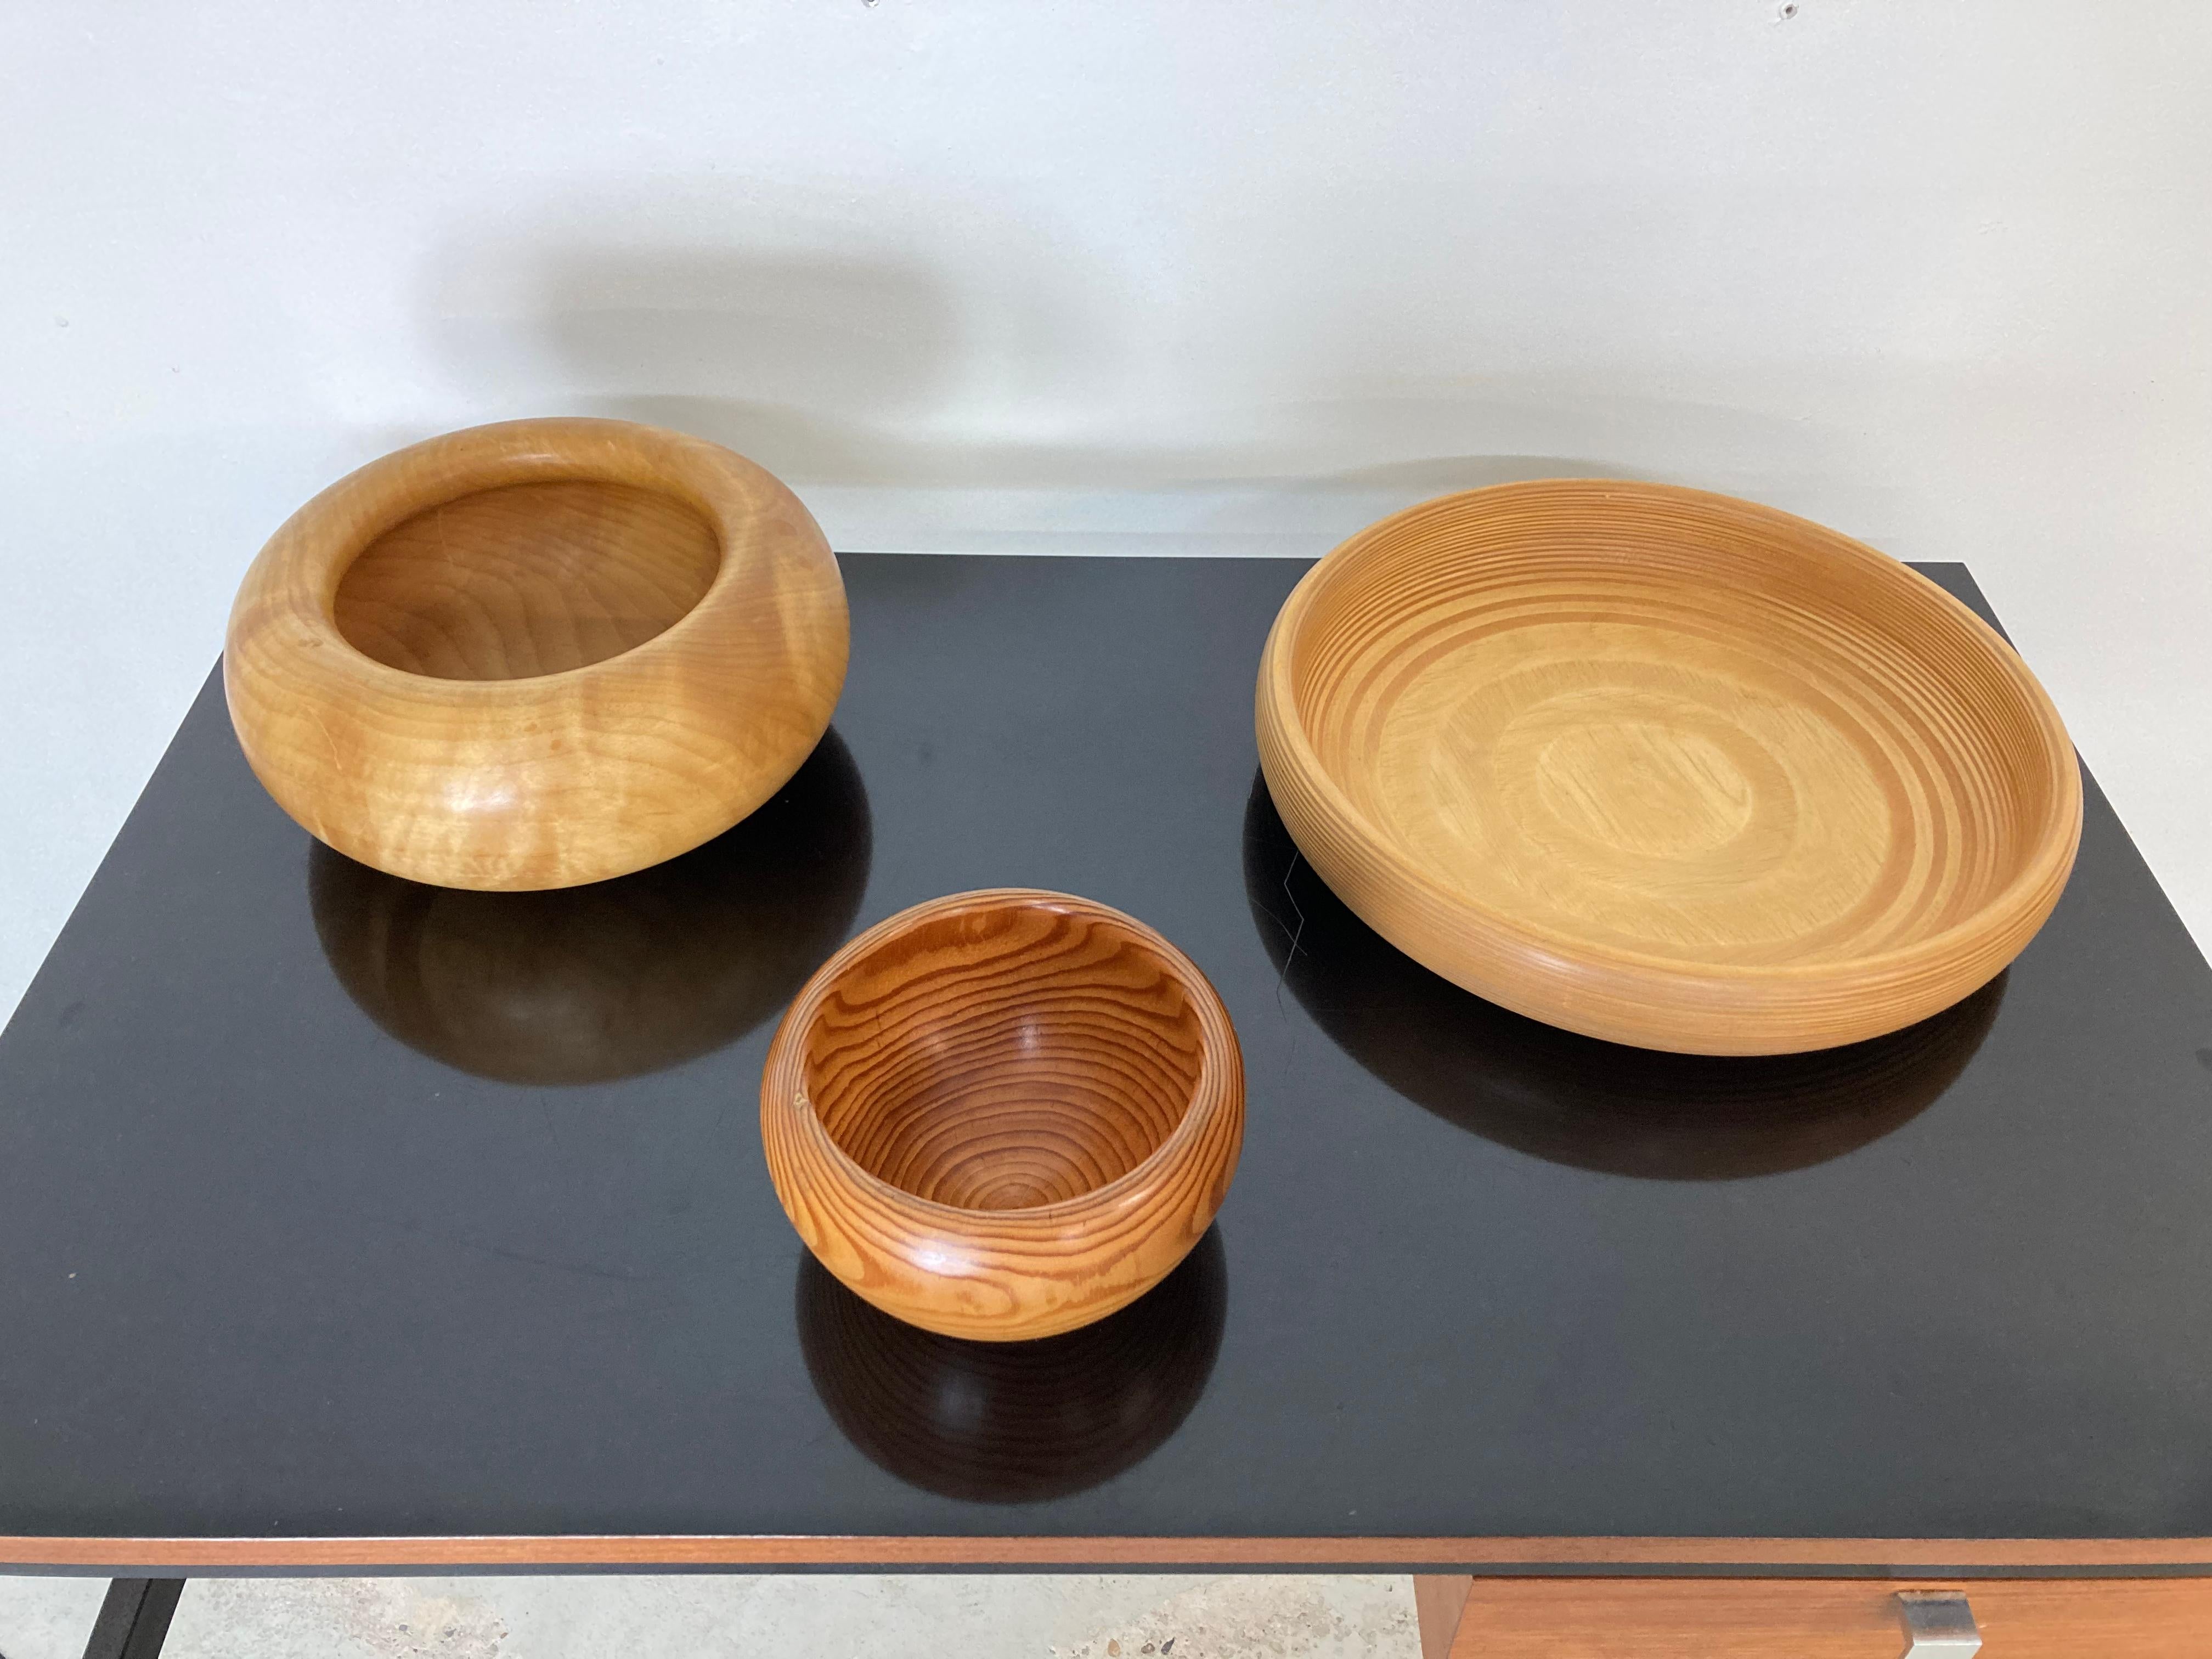 Set of three decorative wood dishes by designer Martti Hyppanen.

Made in Finland.

Two dishes in sculpted solid wood, one dish in sculpted plywood.

Marked accordingly.

Measurements:
Large D 40 x H 7.5 cm
Medium D 30 x H 13 cm
Small D